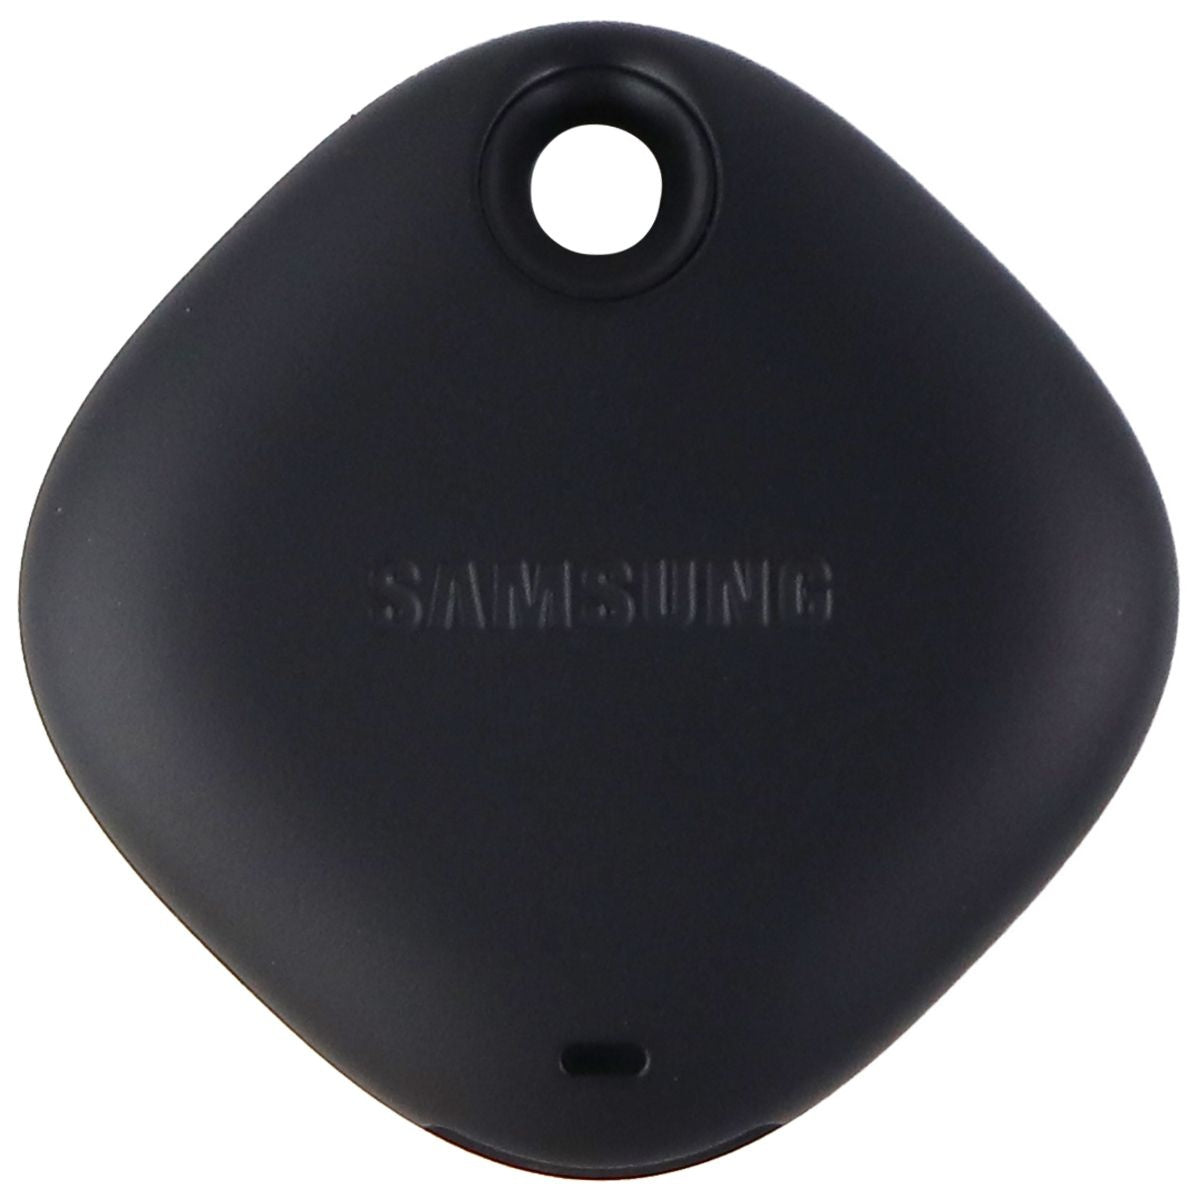 Samsung Galaxy SmartTag Bluetooth Tracker & Item Locator - Black GPS Accessories & Tracking - Tracking Devices Samsung    - Simple Cell Bulk Wholesale Pricing - USA Seller